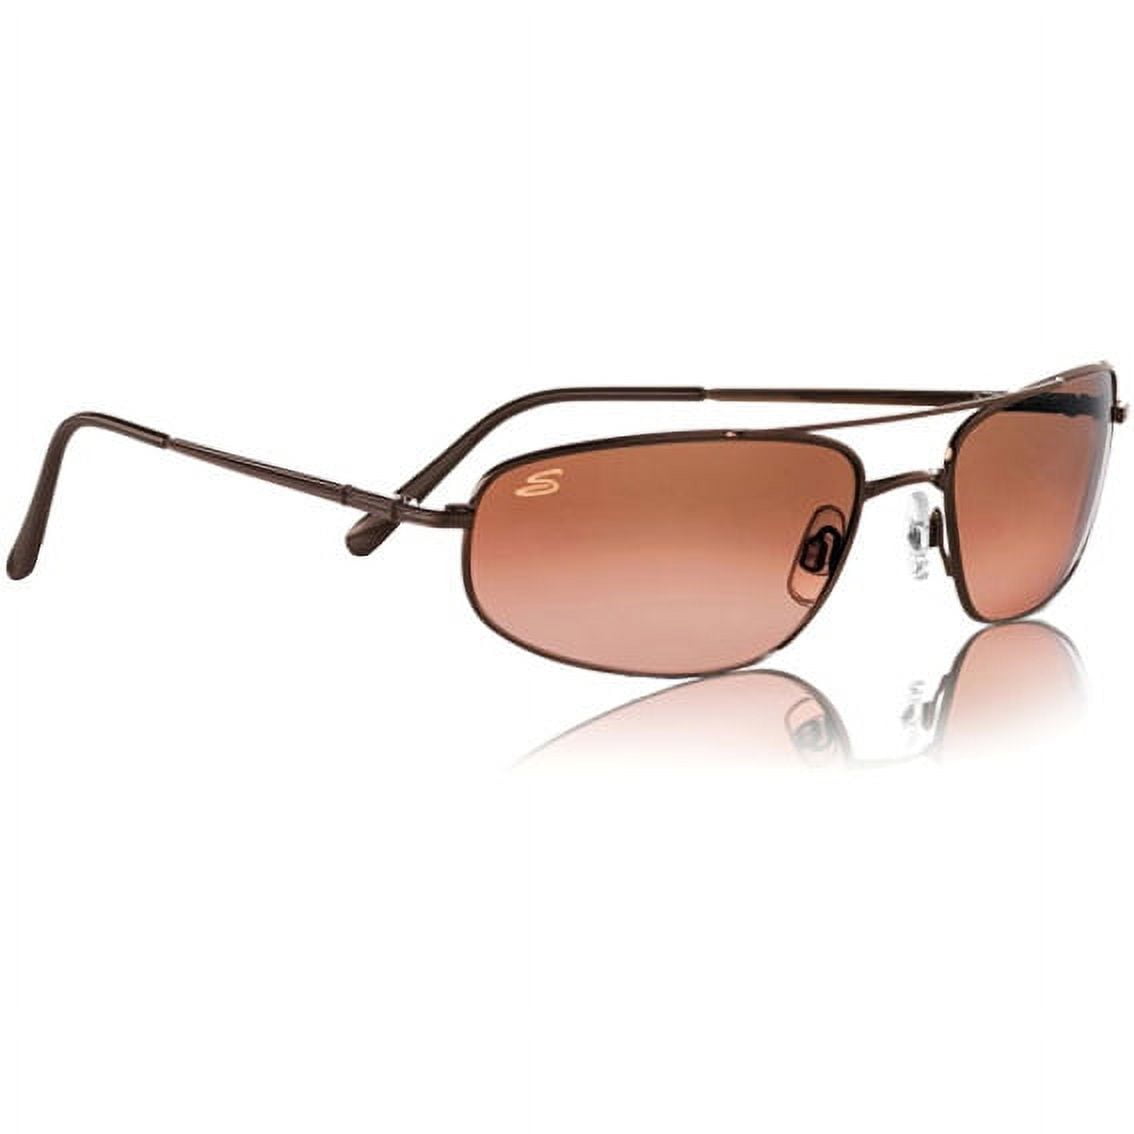 Serengeti Velocity In Espresso Frames With Drivers Gradient, 42% OFF